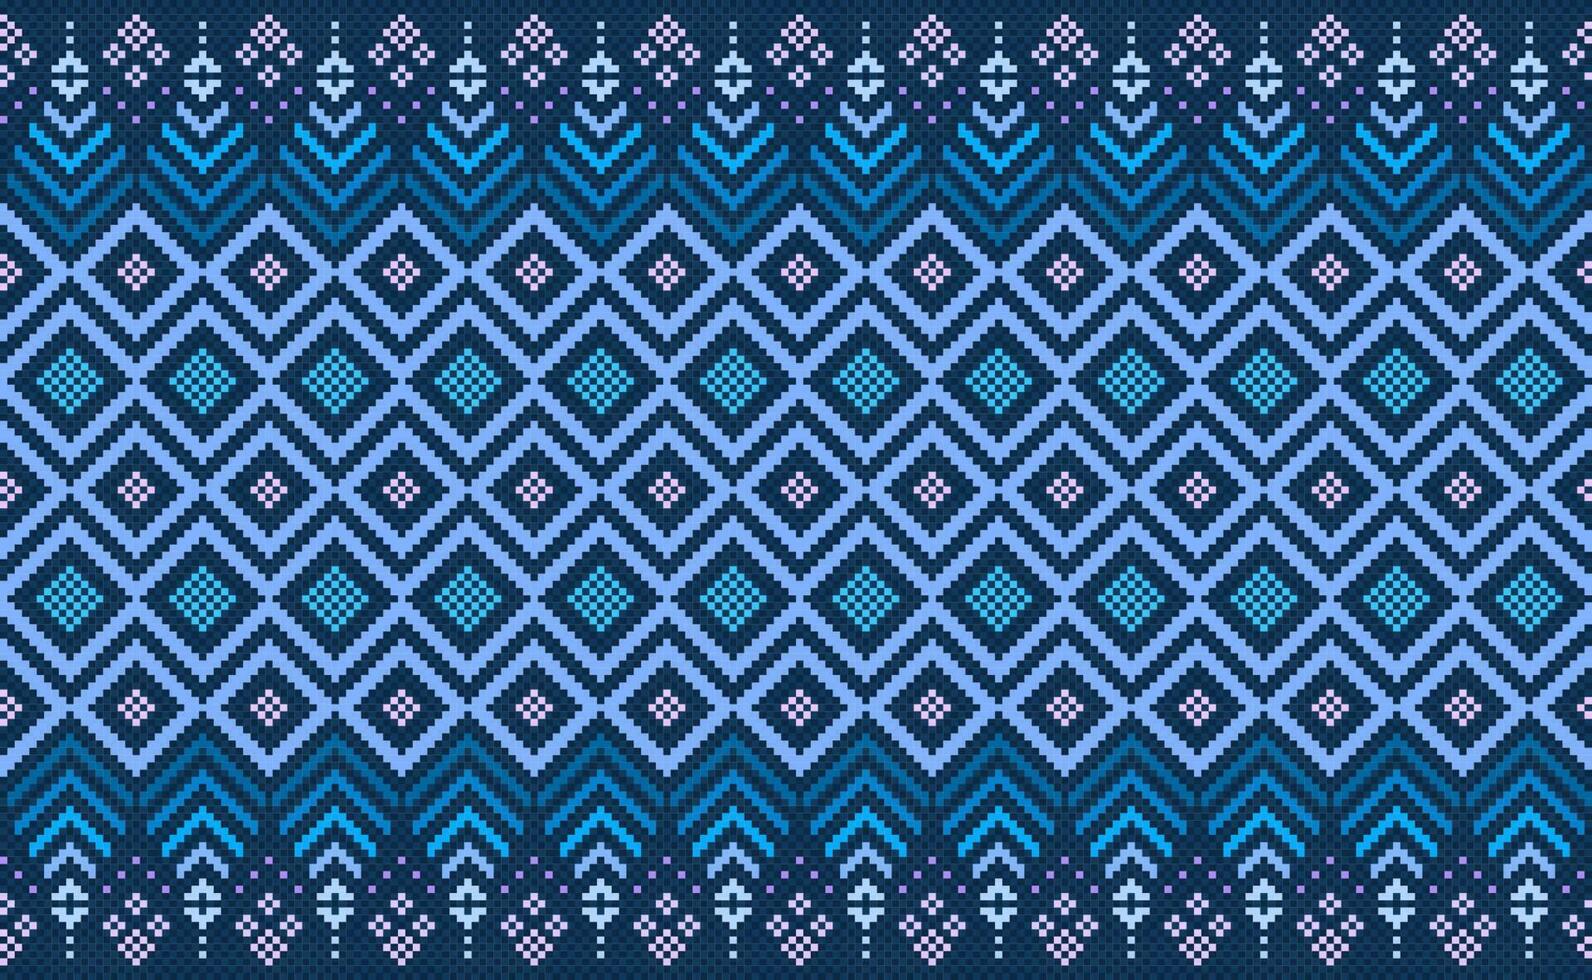 Embroidery ethnic pattern, Vector Geometric pattern background, Cross stitch traditional triangle style